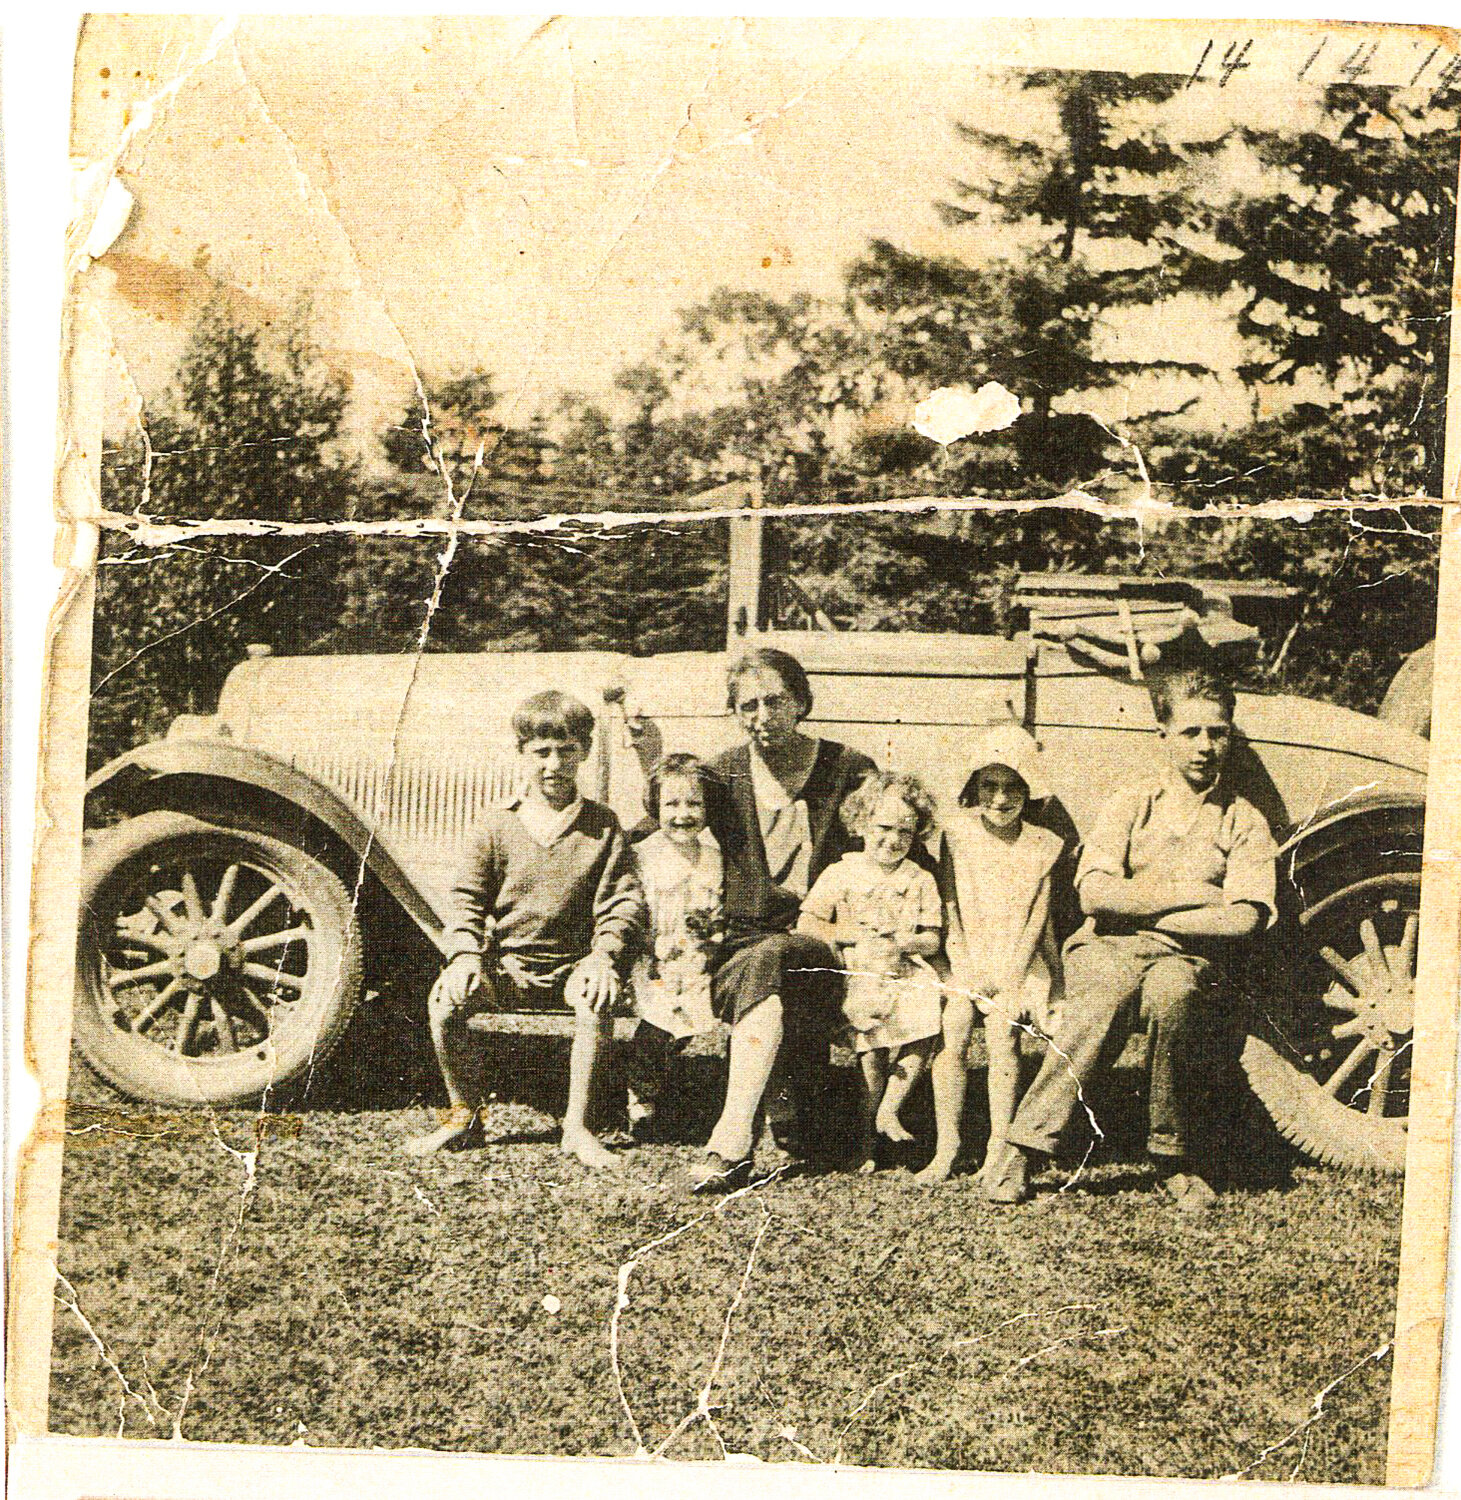 Gordon MacDougall and family pictured with the Model A Ford his father, John, purchased for the family when Gordon was a just boy in Prince Edward Island in Canada. Gordon is on the far left, at age seven, with his mother, Rhoda, and his sisters and brother.